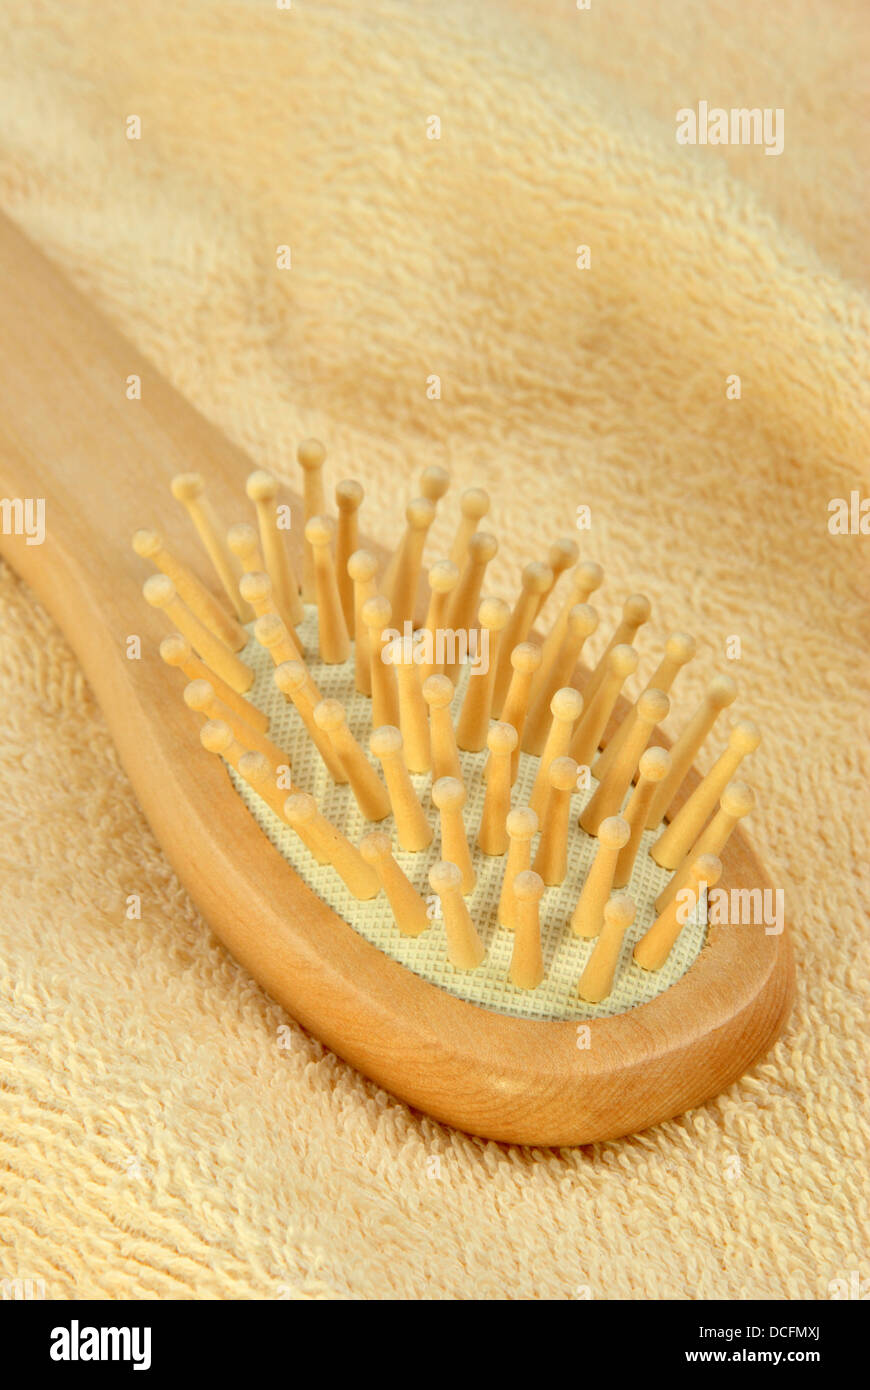 new hair brush on a terry cloth towel Stock Photo